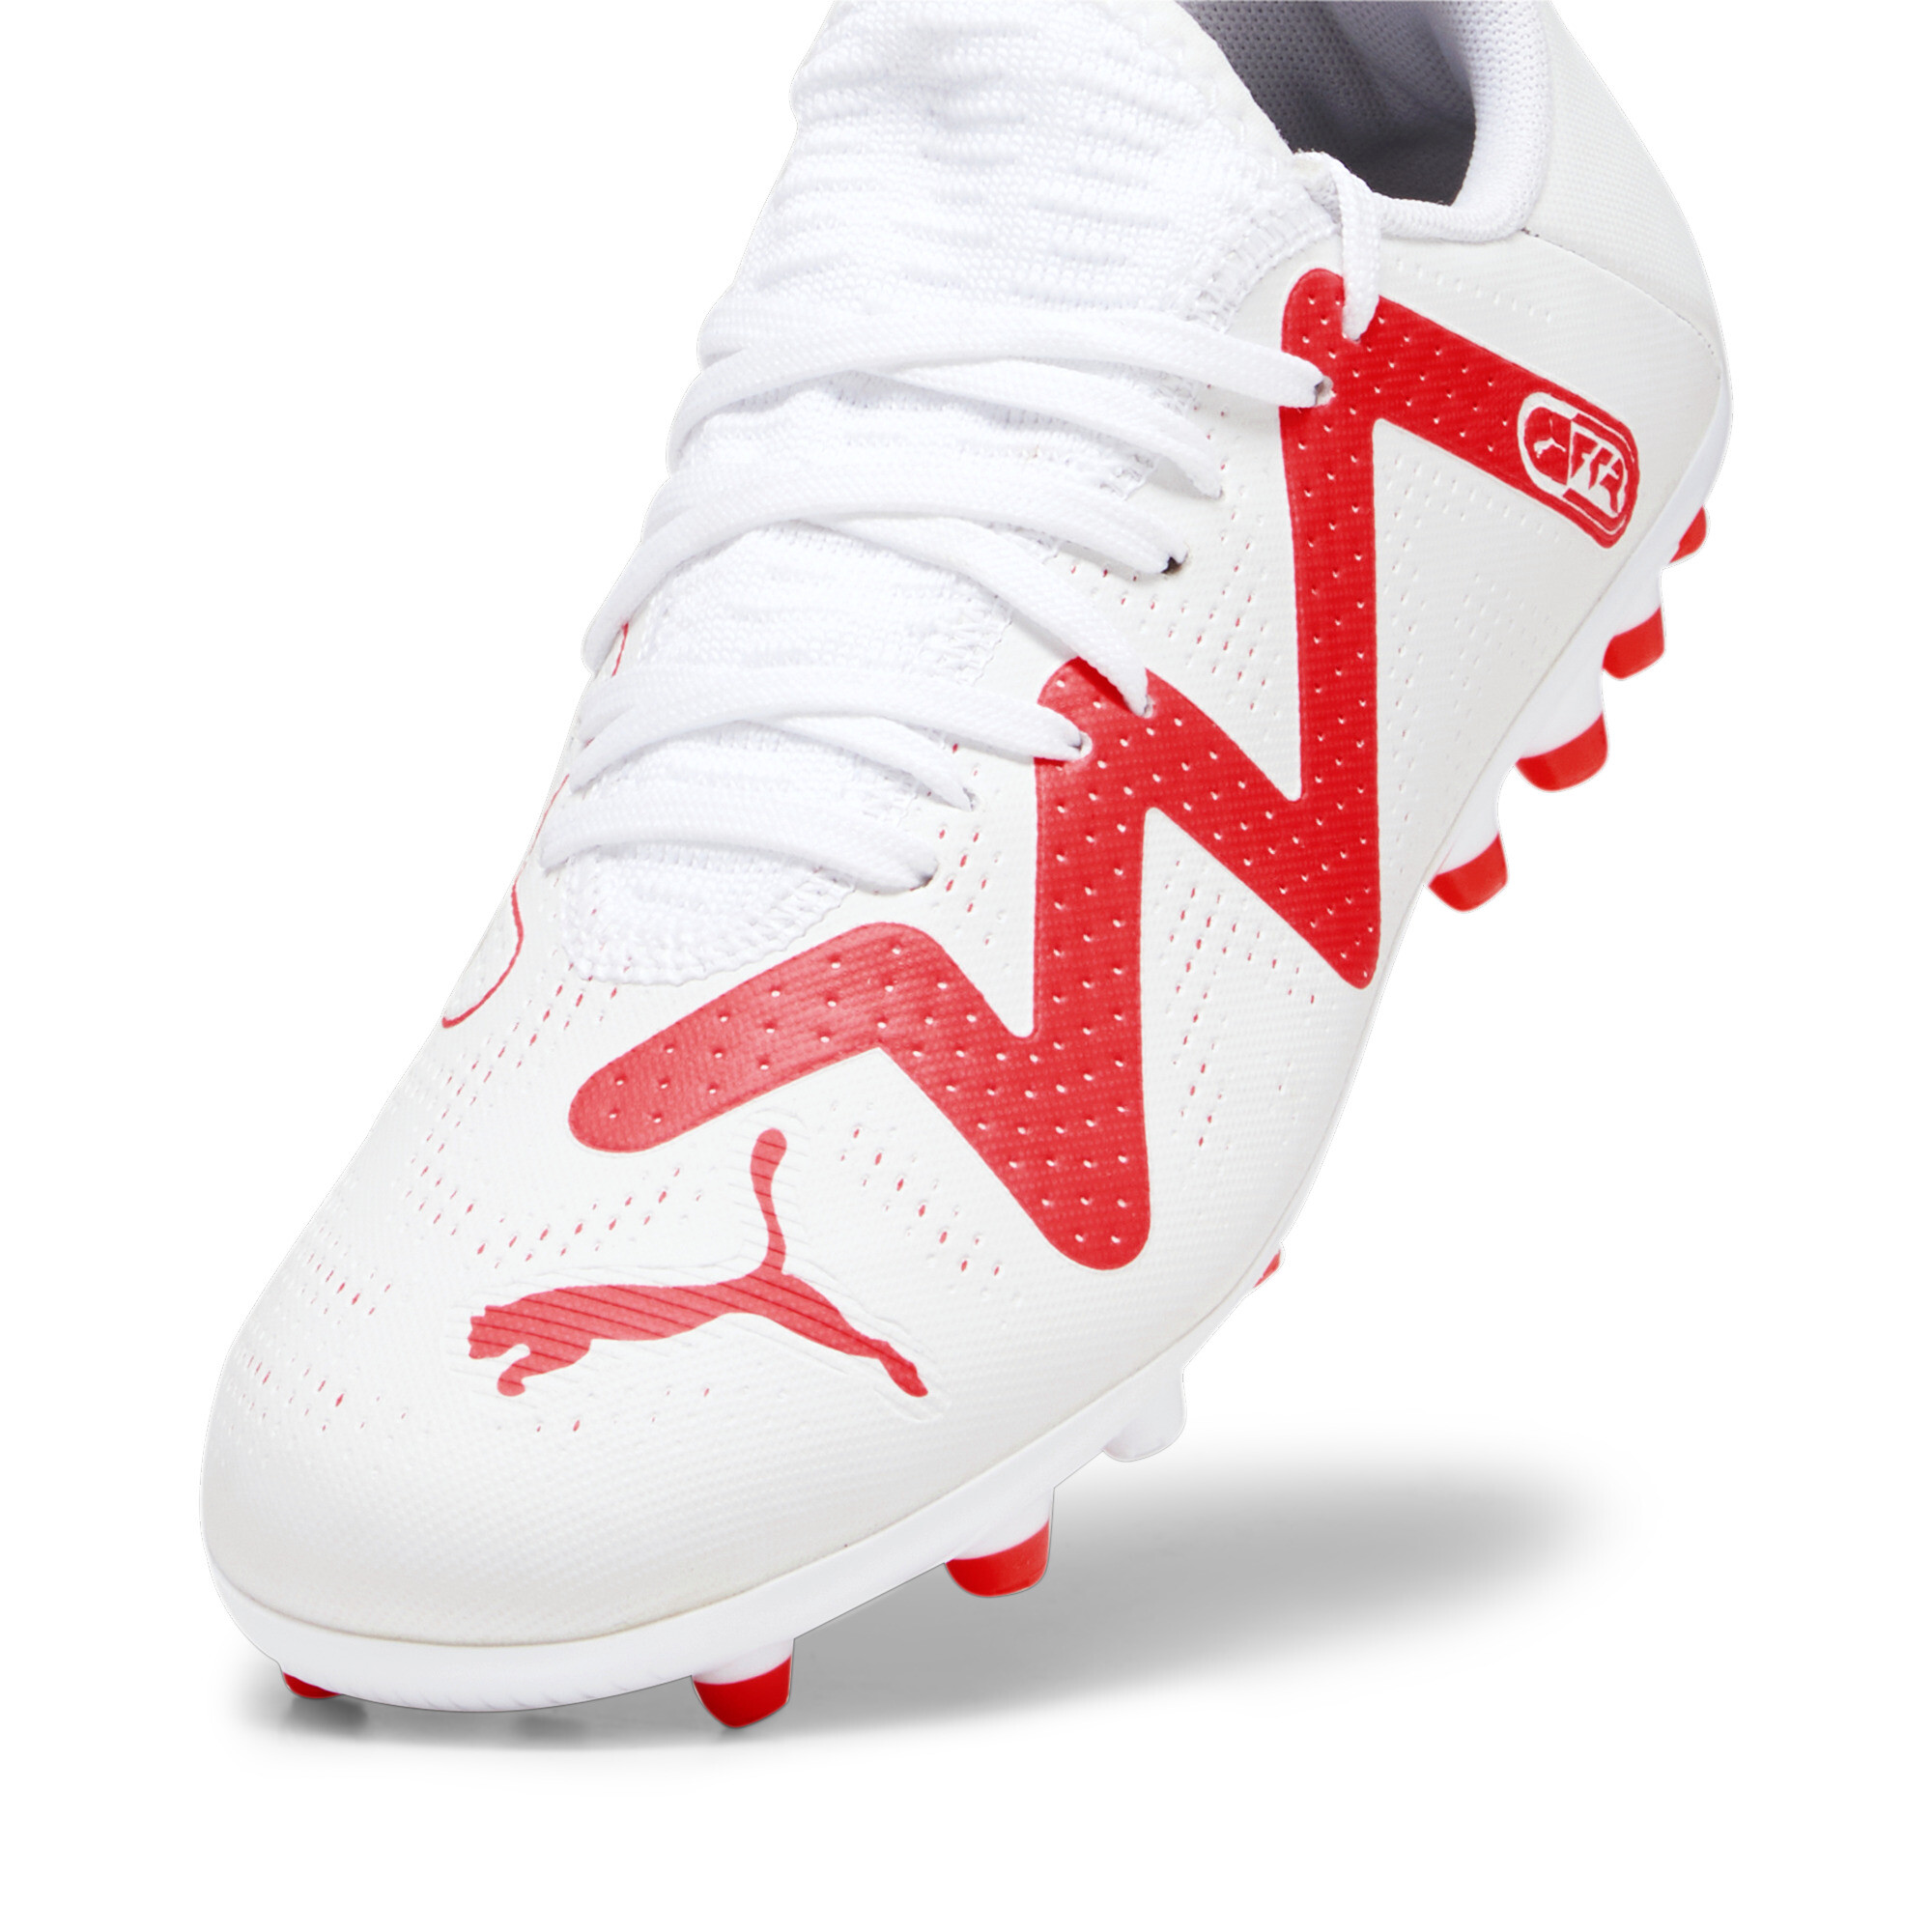 Puma FUTURE PLAY MG Youth Football Boots, White, Size 35.5, Shoes